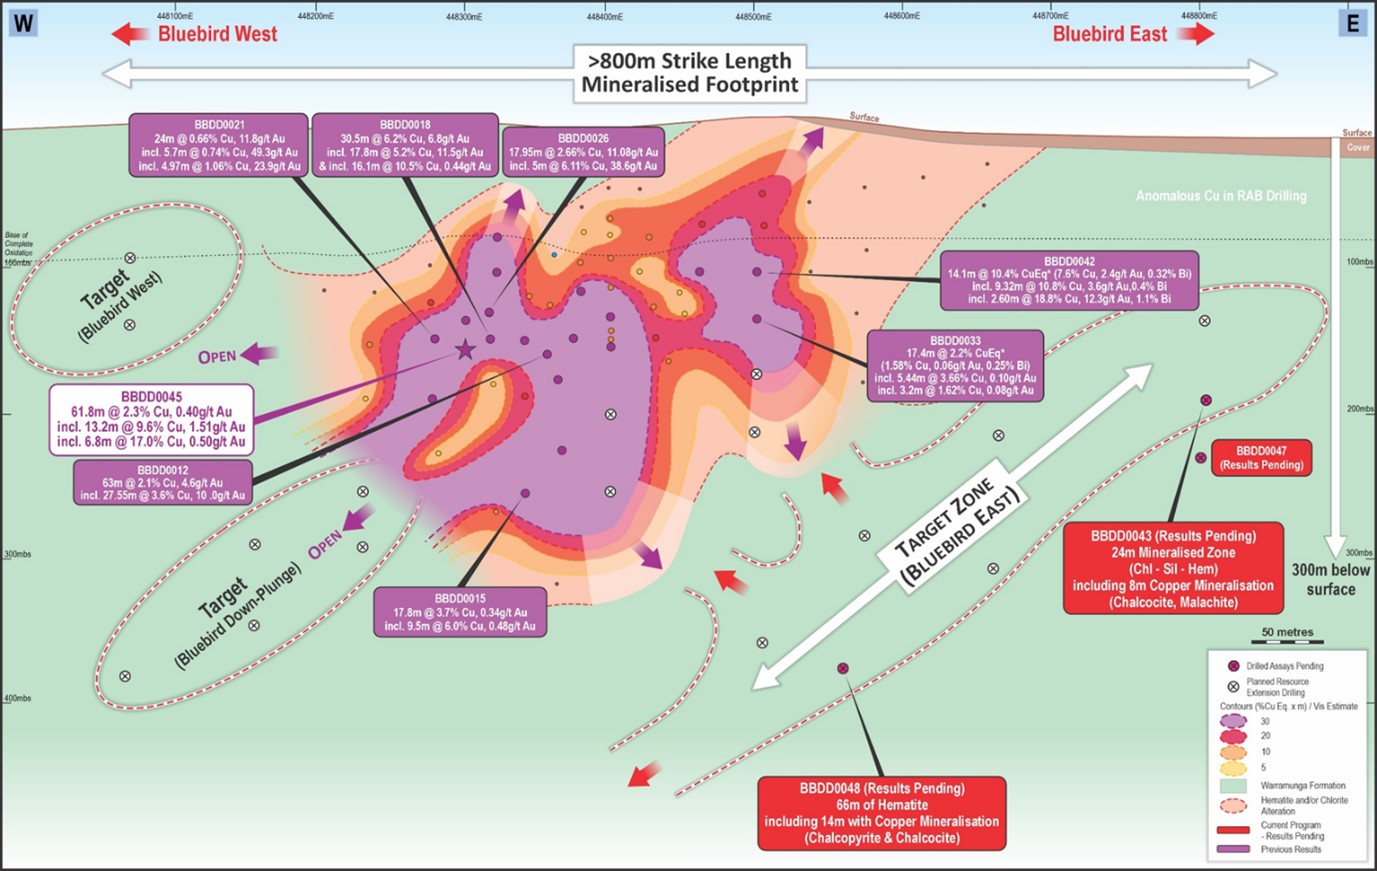 Geological map of the Bluebird region shows >800m strike length with mineralized footprint, target zones and drill results.